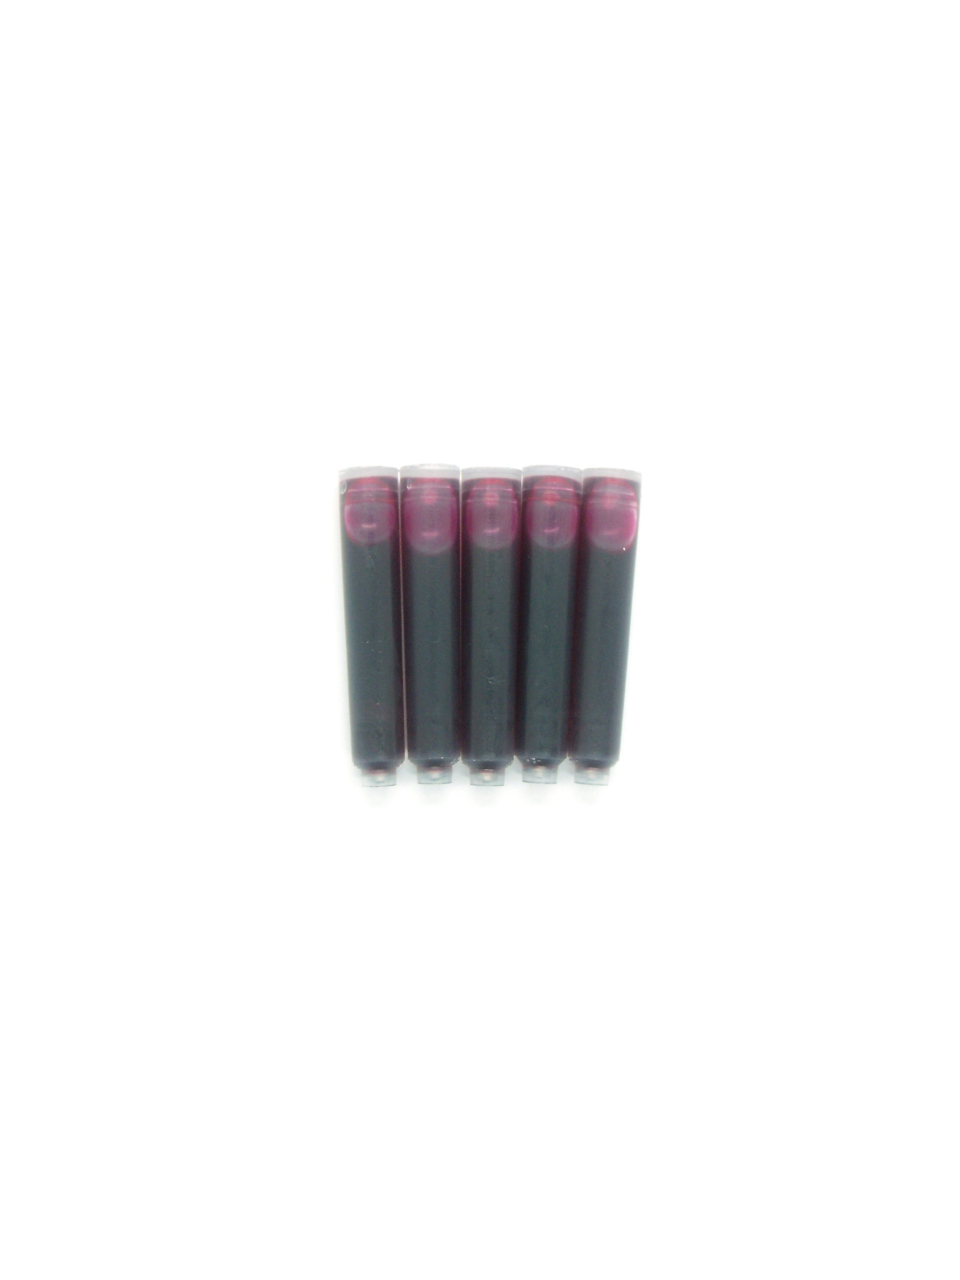 PenConverter Ink Cartridges For Ohto Fountain Pens (Pink)